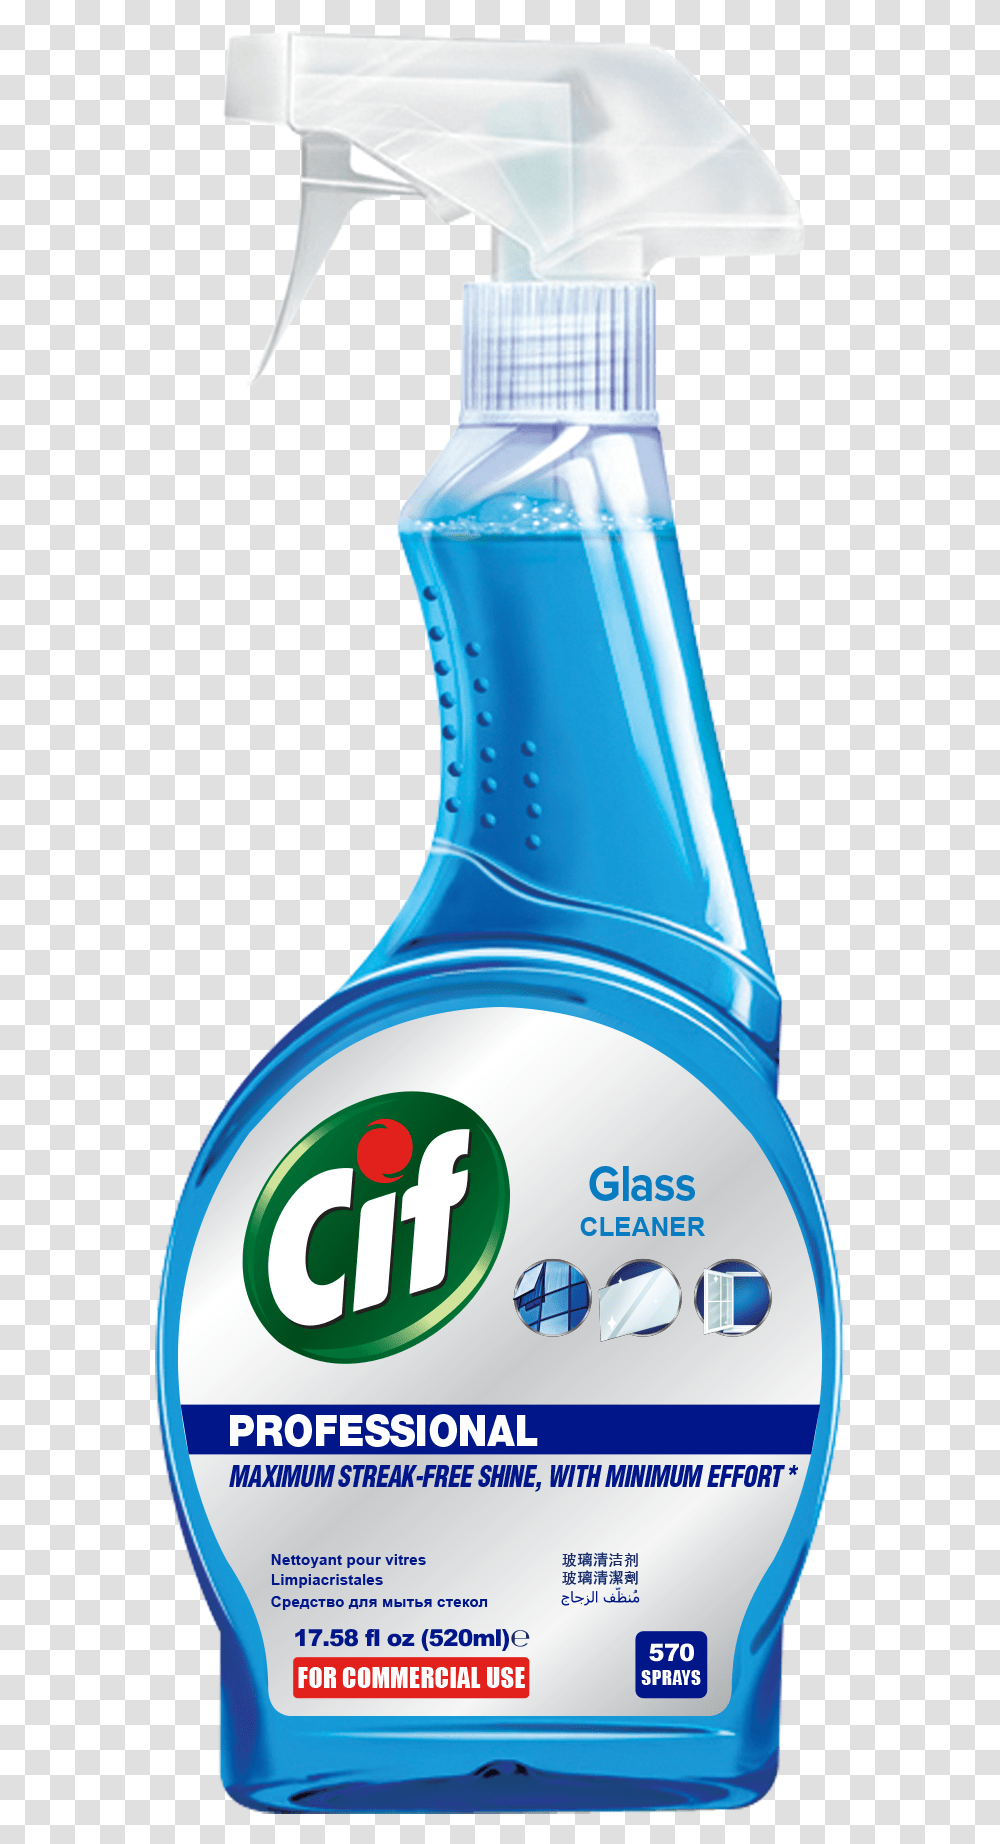 Cif Professional Glass Cleaner, Bottle, Cosmetics, Label Transparent Png